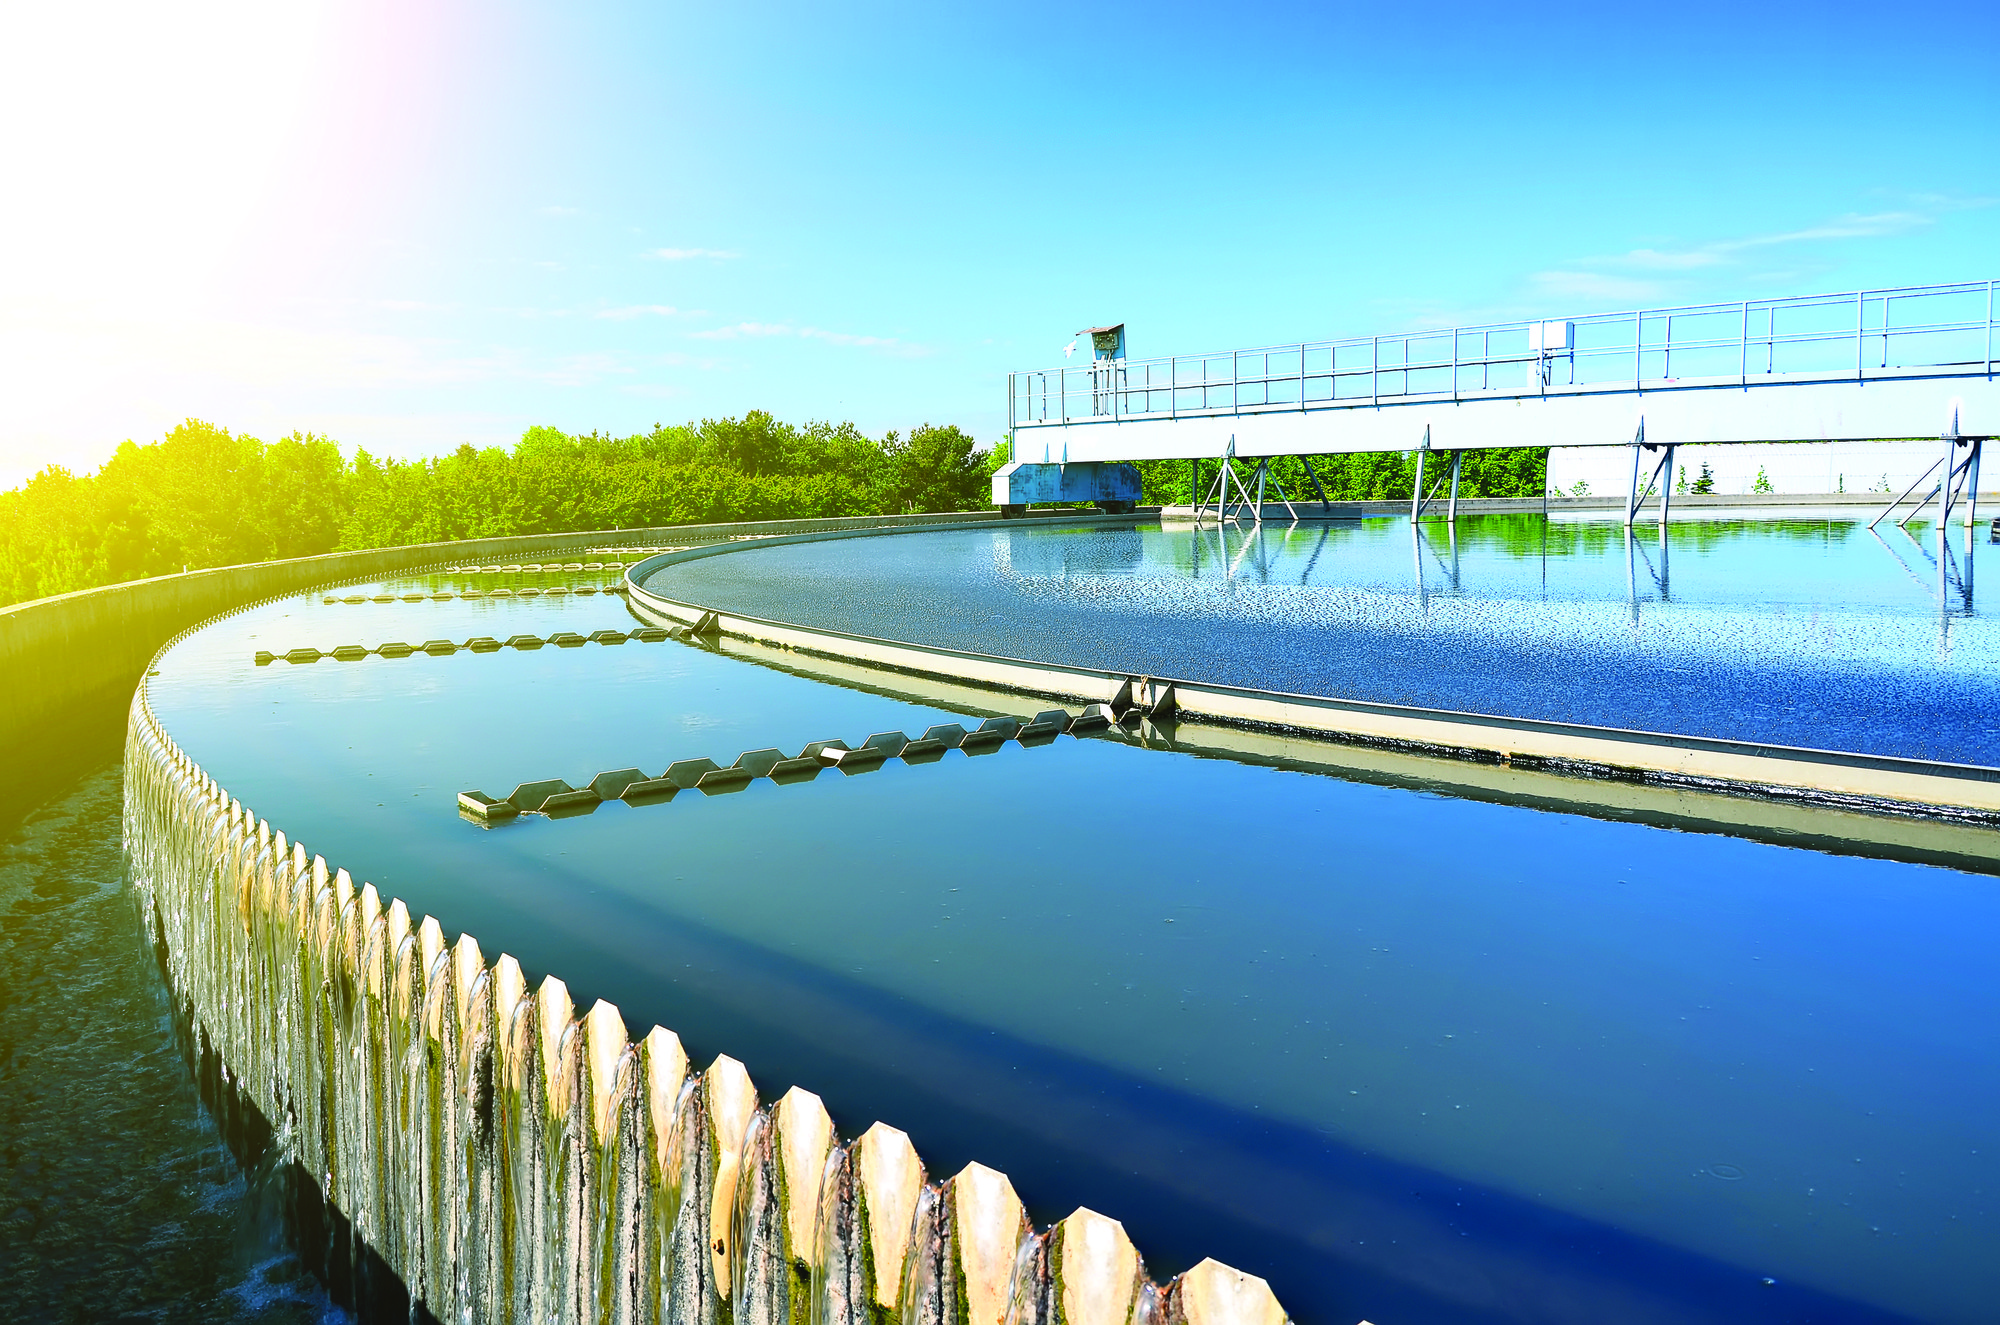 Municipal wastewater treatment facilities can become both more sustainable and profitable by following circular economy principles.